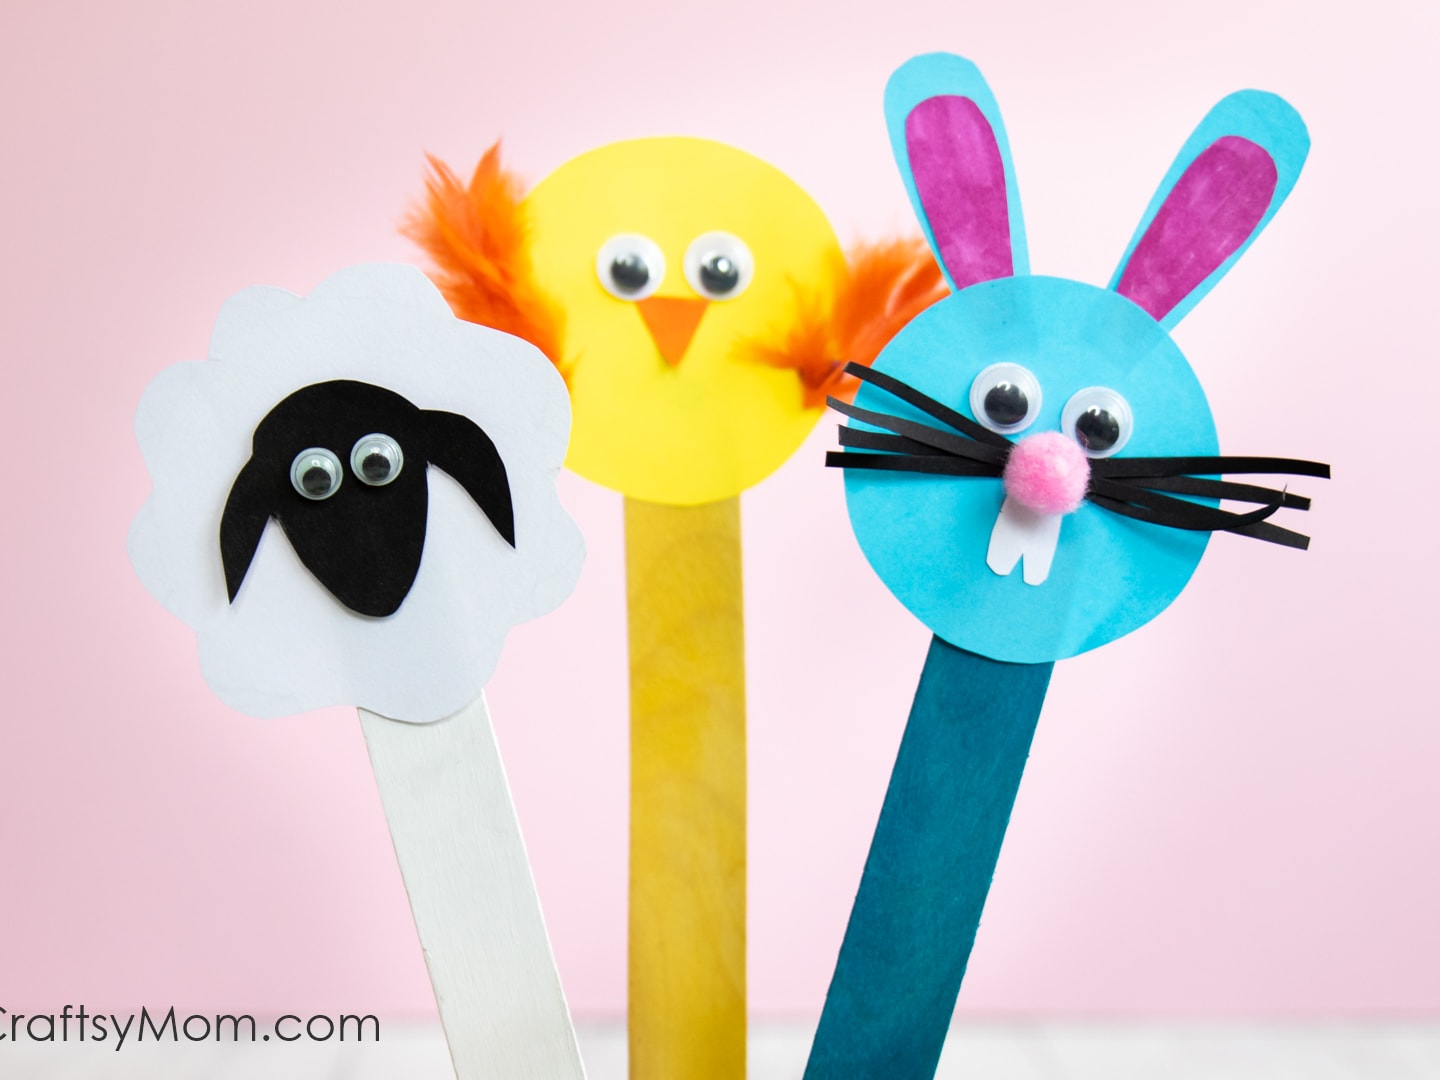 20 Simple Popsicle Stick Crafts for Kids to Make and Play